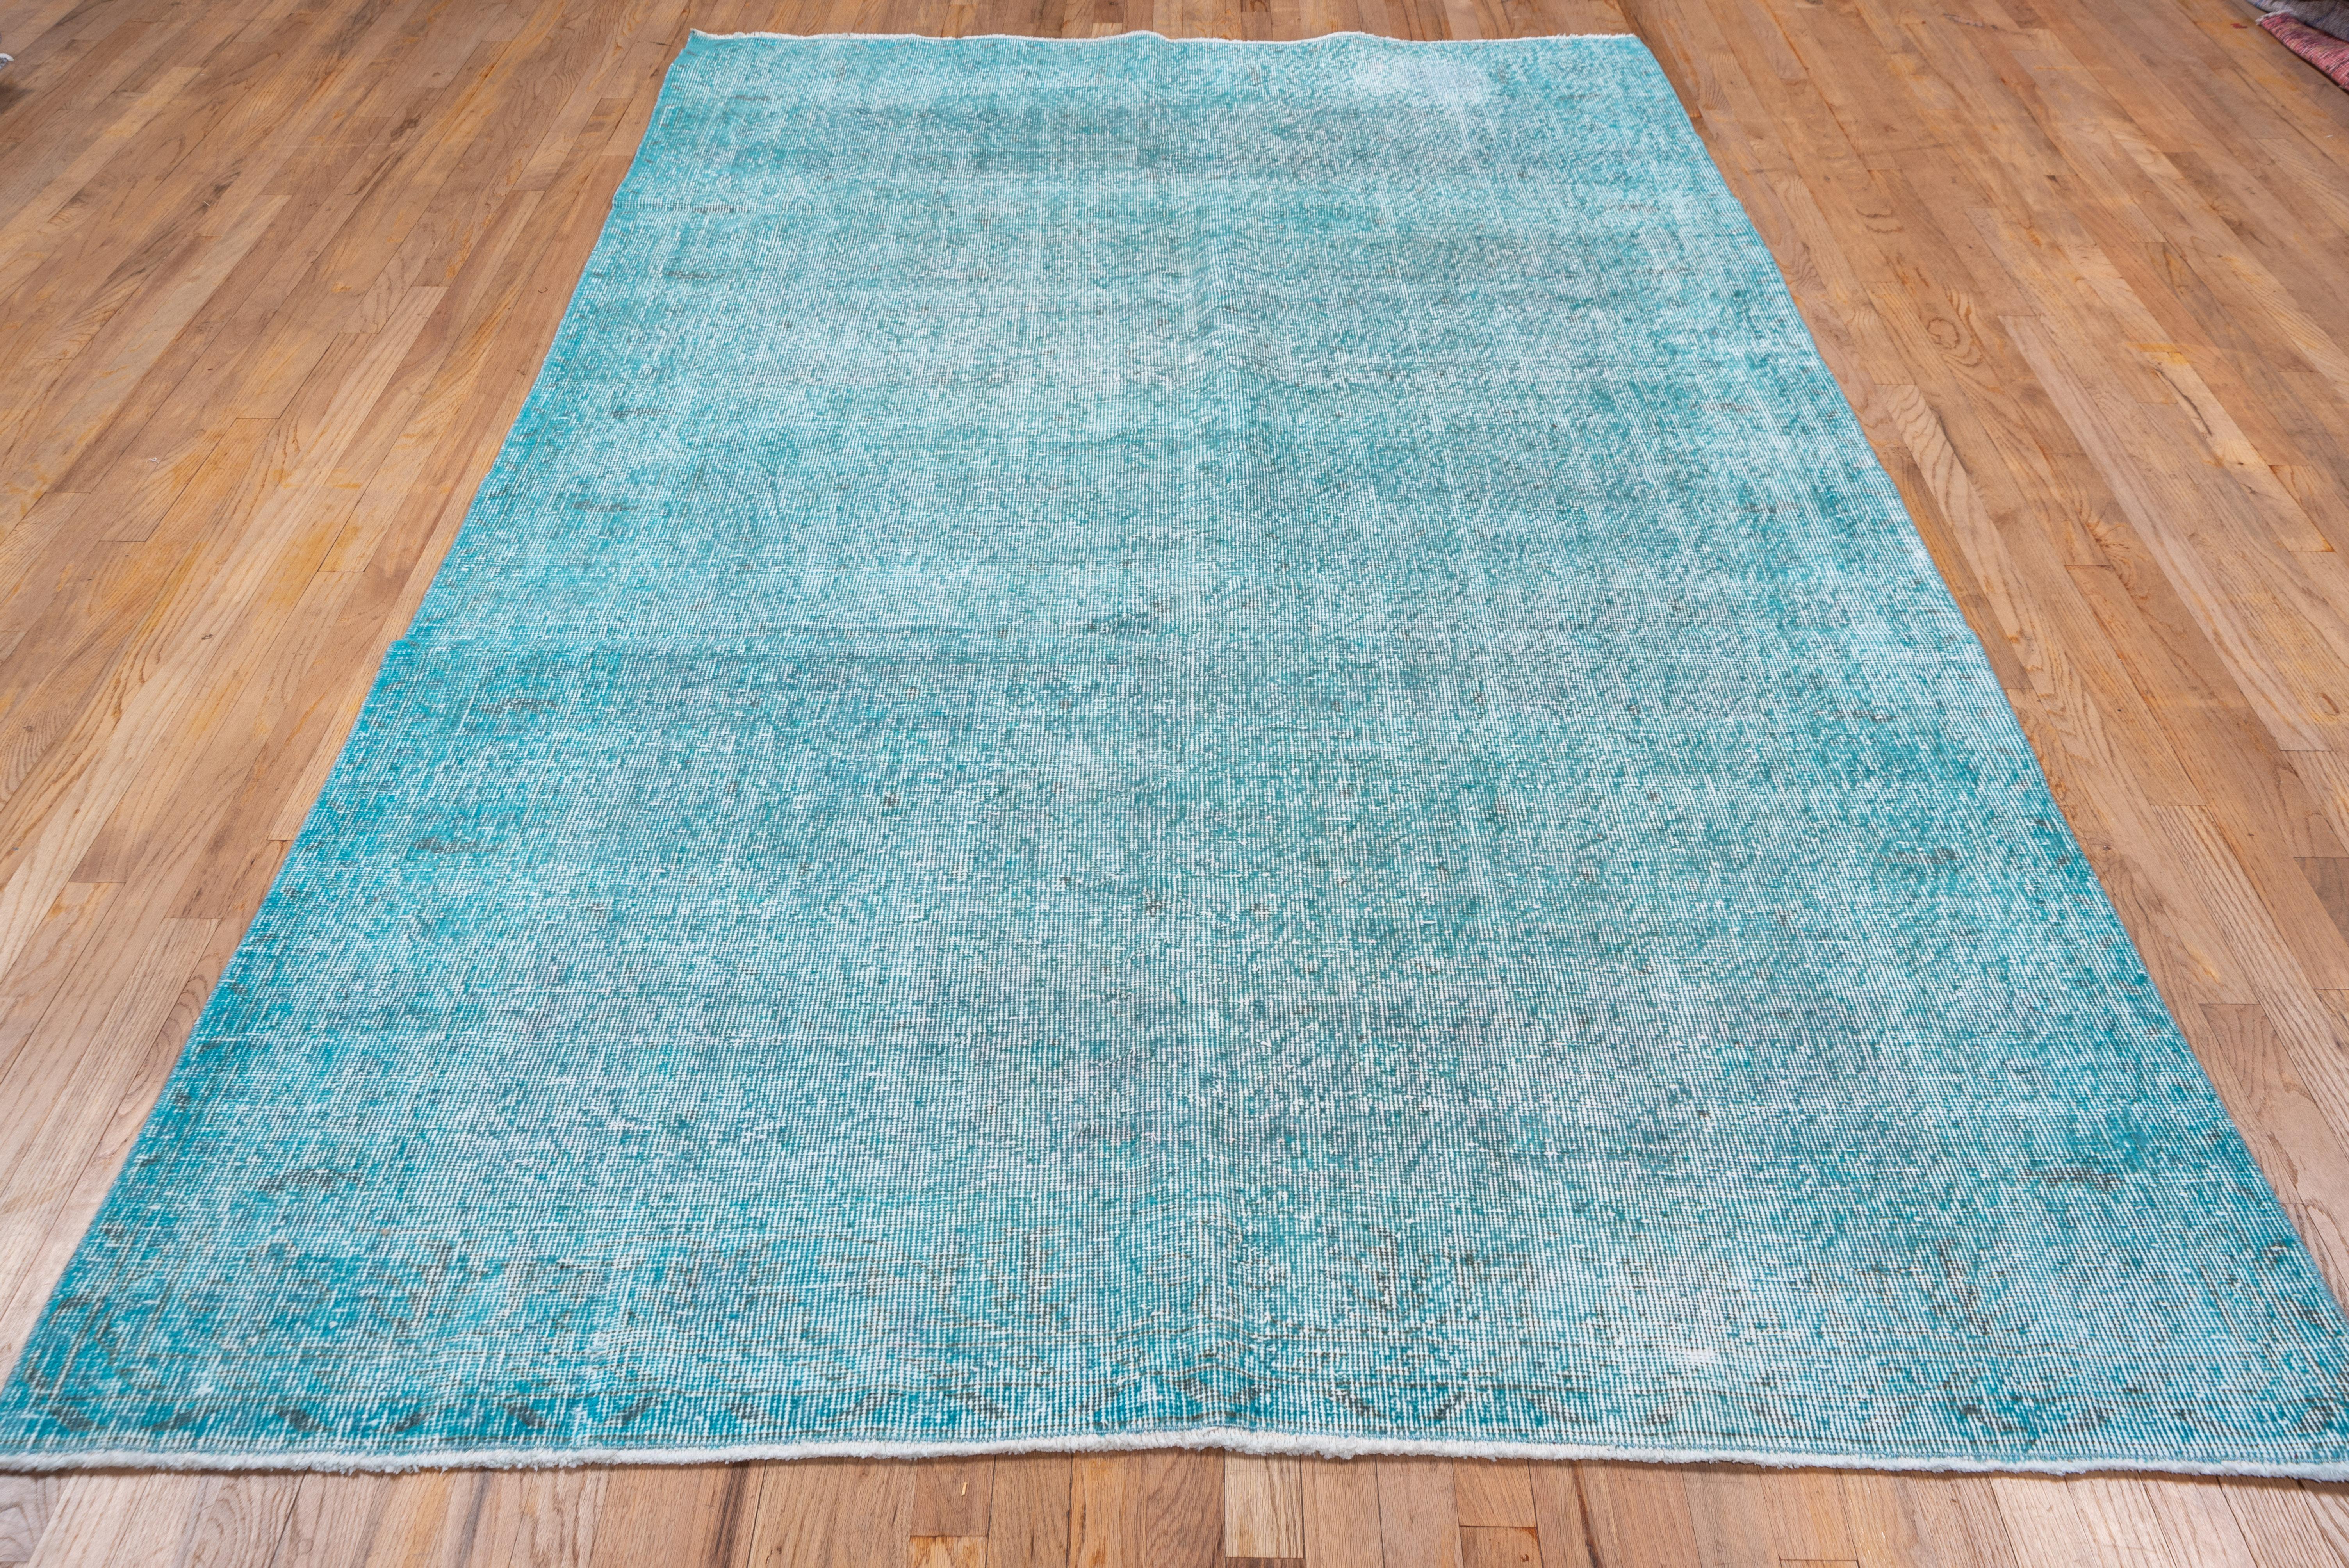 Mid-Century Modern Vintage Bright Turquoise Overdyed Wool Rug, Shabby Chic